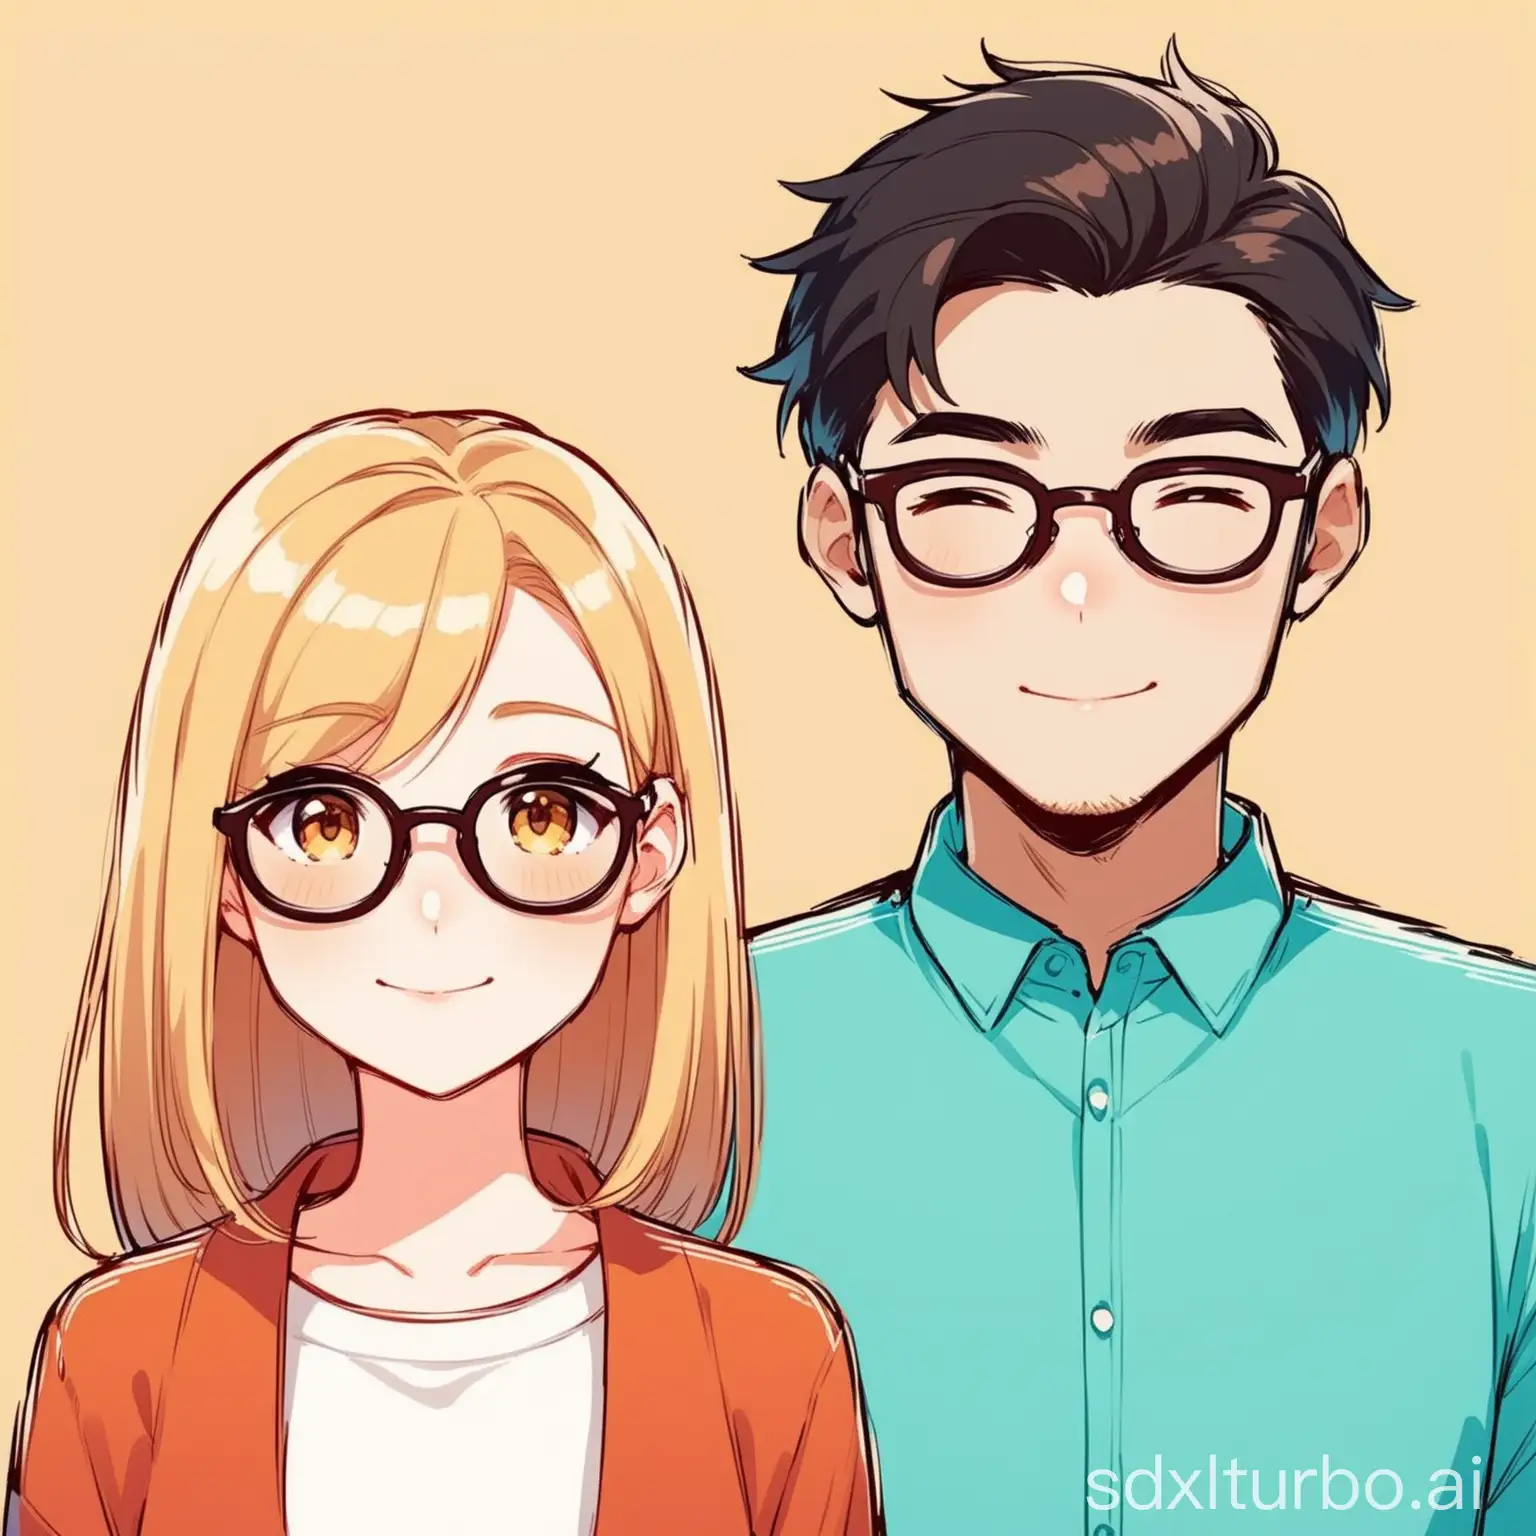 Adorable-Couple-Avatar-in-Glasses-and-without-Glasses-Side-by-Side